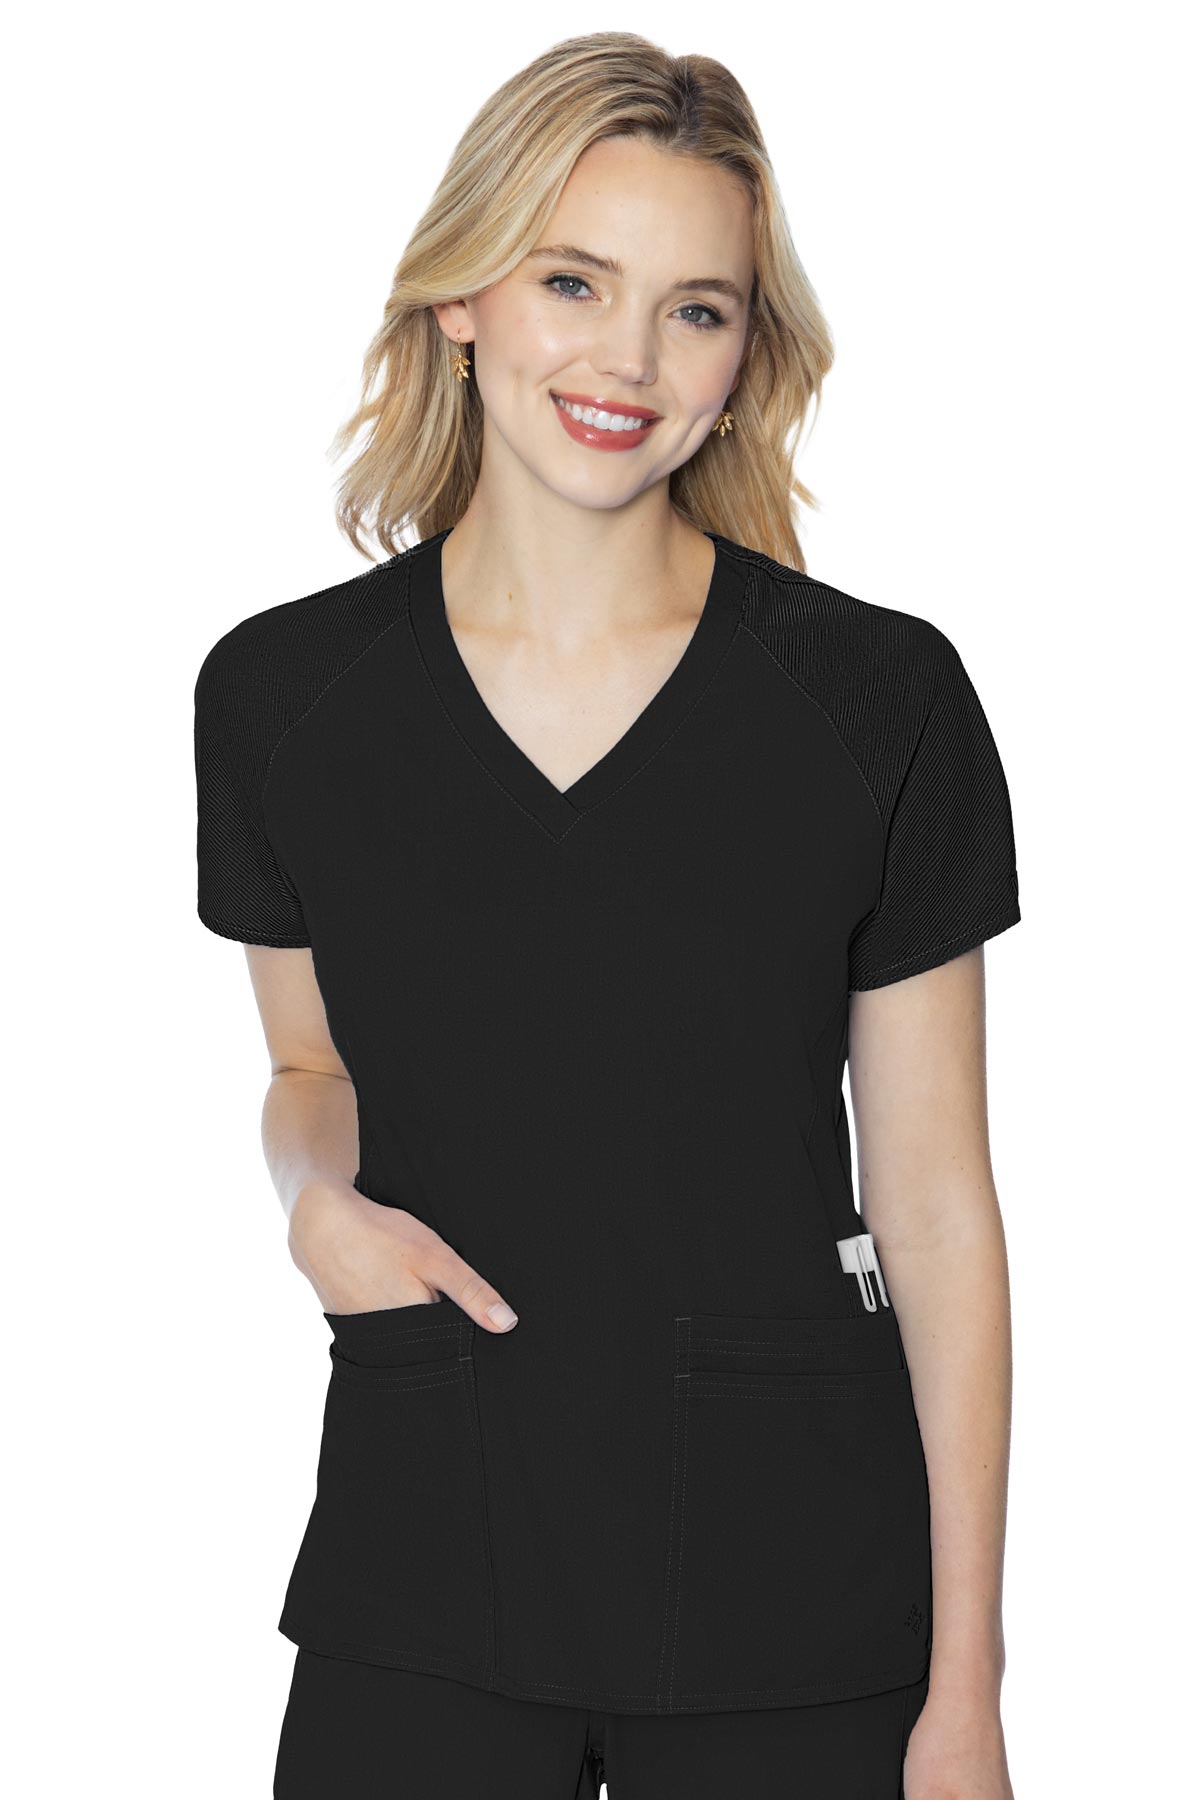 Med Couture Scrub Top Touch Raglan Sleeve in black at Parker's Clothing and Shoes.